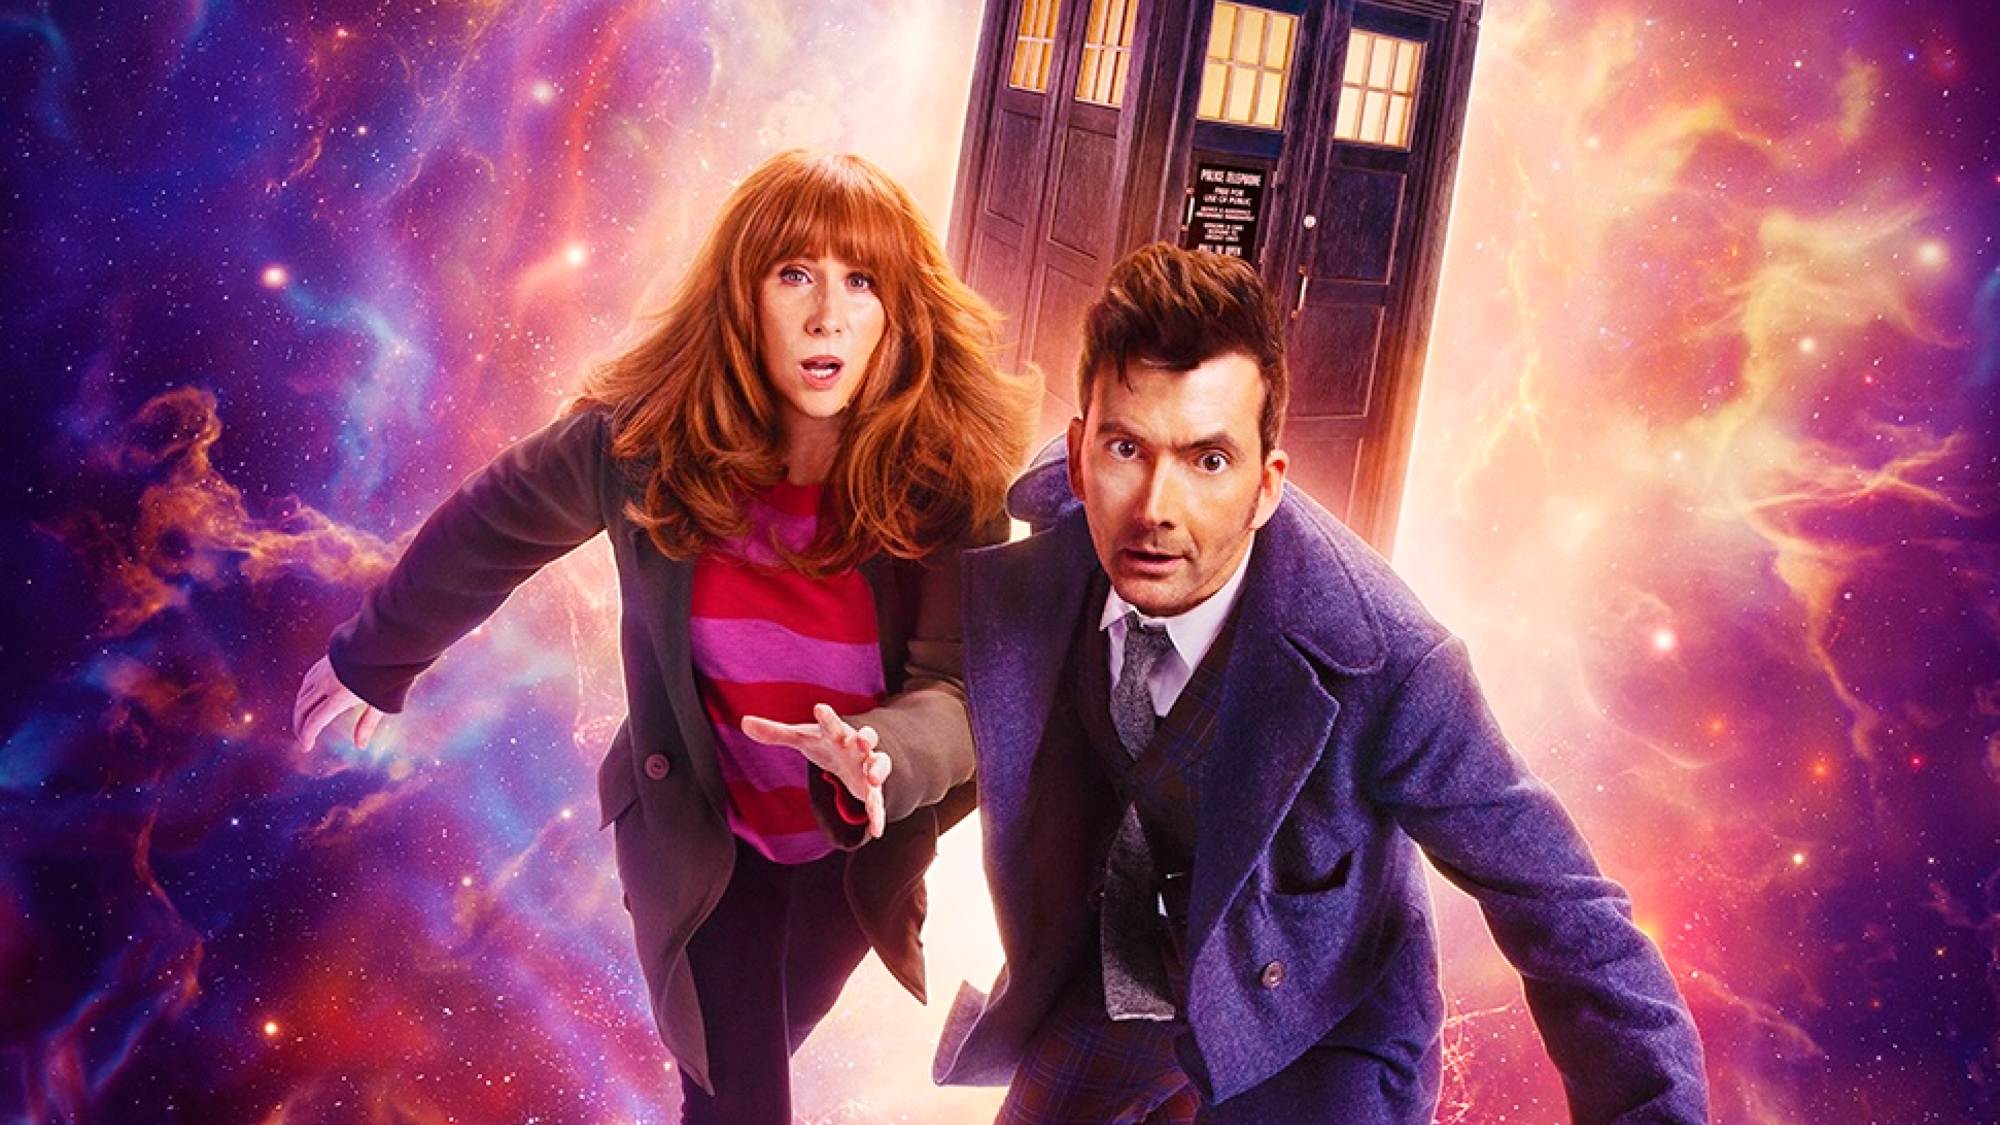 Doctor Who: Star Beast'in posterinde Catherine Tate ve David Tennant